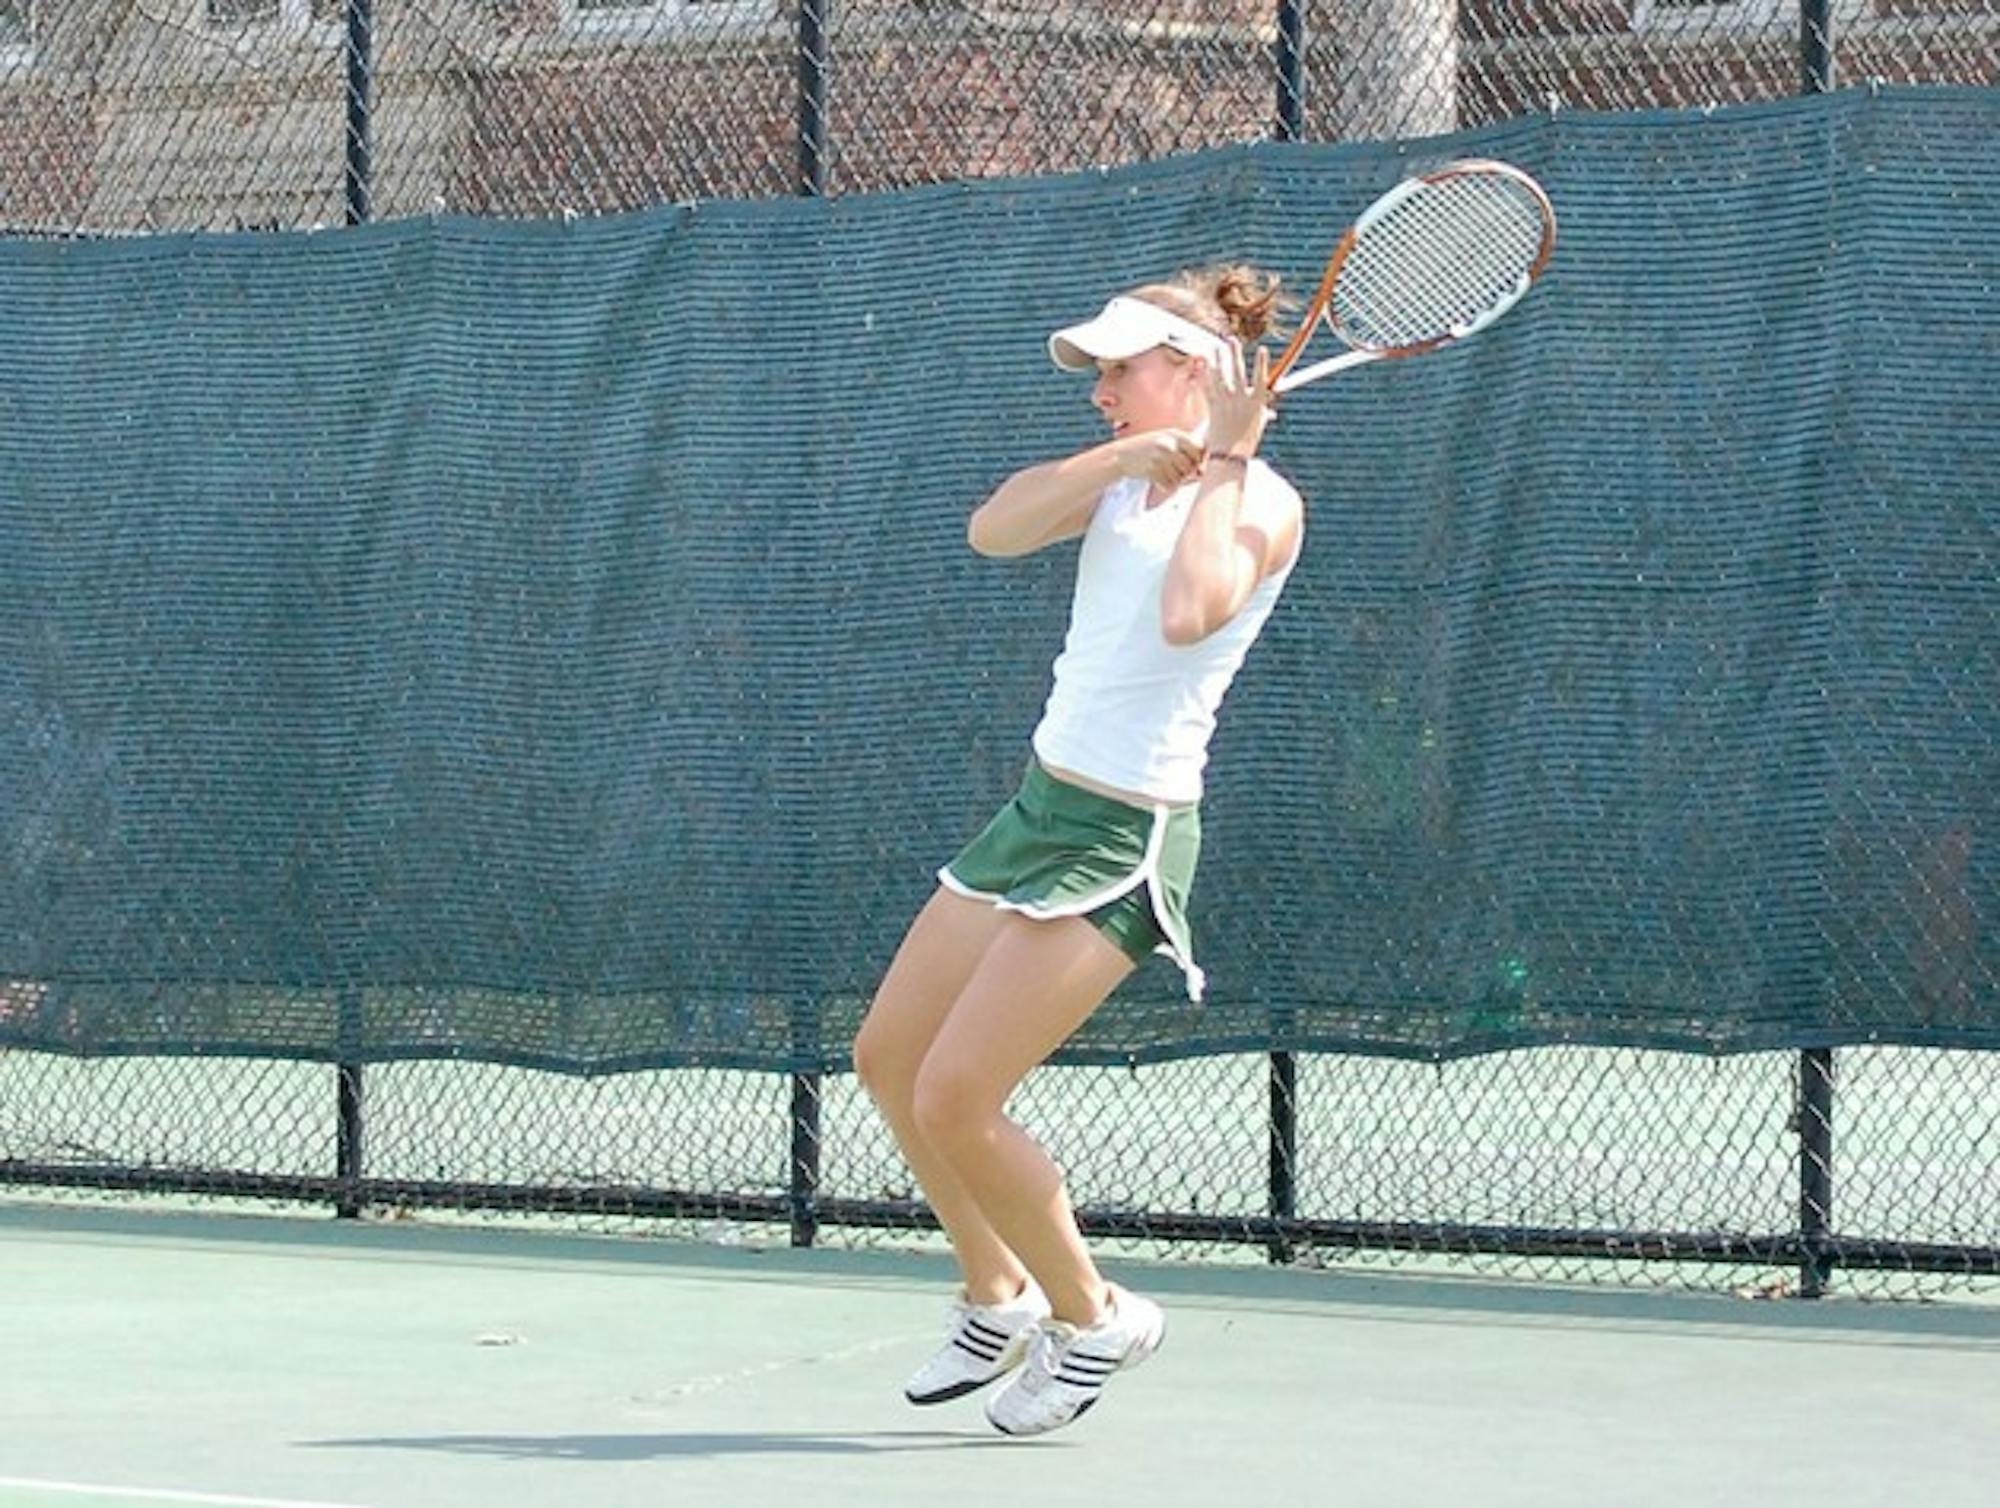 17th-seeded Molly Scott '11 beat her first two opponents in straight sets before falling 6-1, 6-0 in the fourth round at the ITA regionals this weekend.